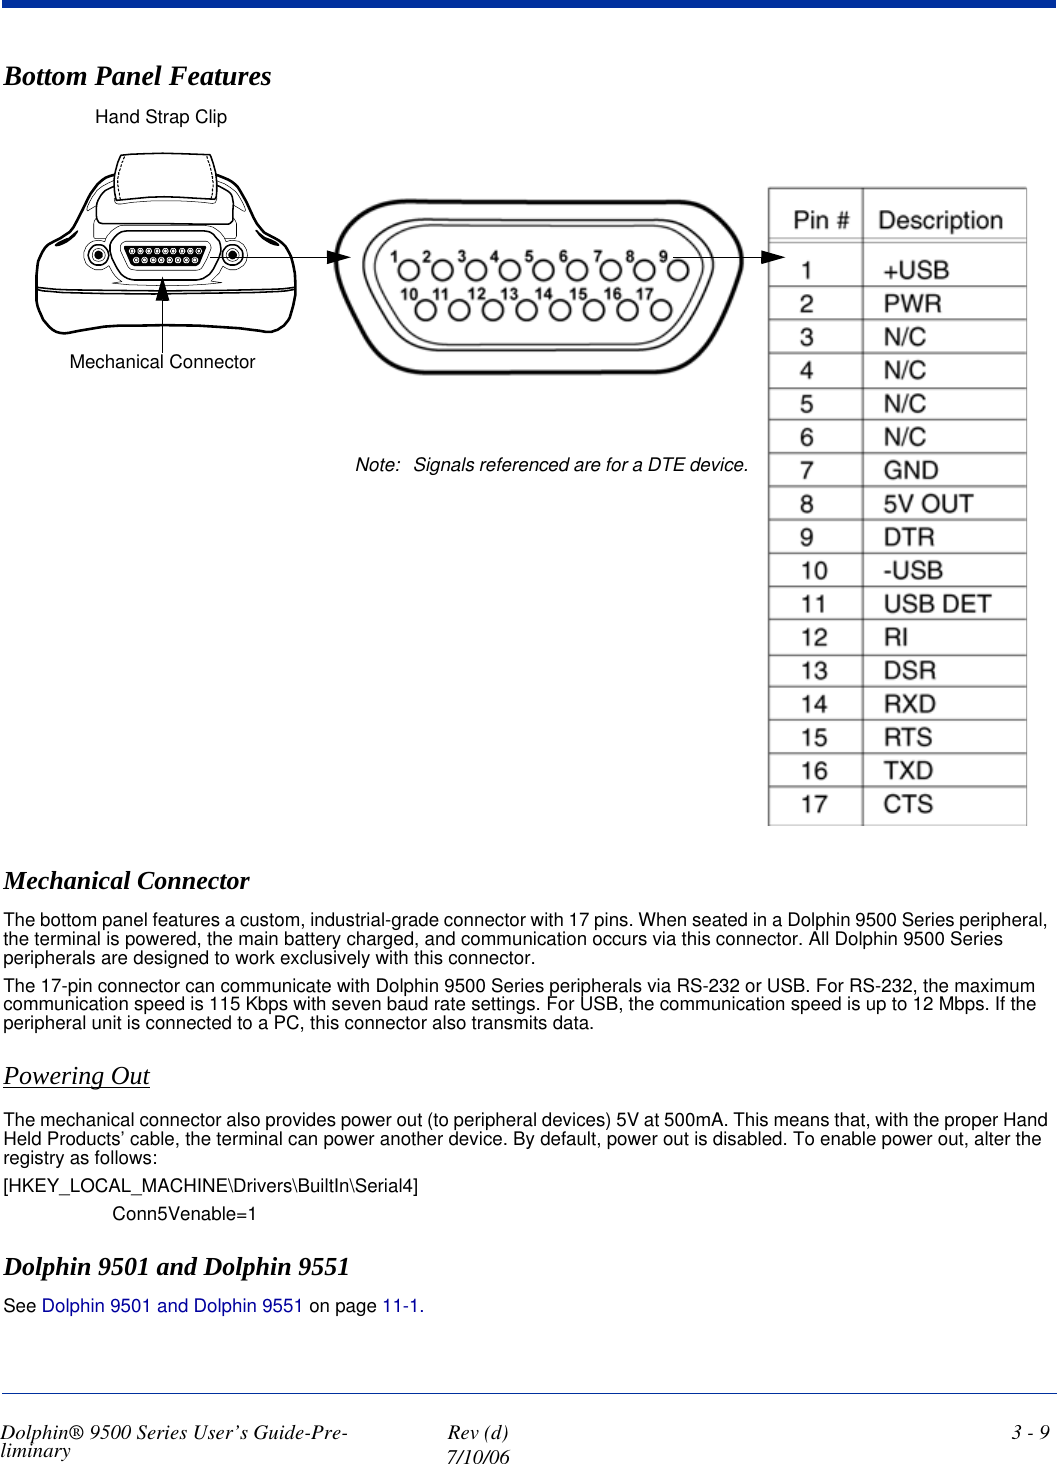 Dolphin® 9500 Series User’s Guide-Pre-liminary  Rev (d)7/10/063 - 9Bottom Panel FeaturesMechanical ConnectorThe bottom panel features a custom, industrial-grade connector with 17 pins. When seated in a Dolphin 9500 Series peripheral, the terminal is powered, the main battery charged, and communication occurs via this connector. All Dolphin 9500 Series peripherals are designed to work exclusively with this connector.The 17-pin connector can communicate with Dolphin 9500 Series peripherals via RS-232 or USB. For RS-232, the maximum communication speed is 115 Kbps with seven baud rate settings. For USB, the communication speed is up to 12 Mbps. If the peripheral unit is connected to a PC, this connector also transmits data. Powering OutThe mechanical connector also provides power out (to peripheral devices) 5V at 500mA. This means that, with the proper Hand Held Products’ cable, the terminal can power another device. By default, power out is disabled. To enable power out, alter the registry as follows: [HKEY_LOCAL_MACHINE\Drivers\BuiltIn\Serial4]Conn5Venable=1Dolphin 9501 and Dolphin 9551See Dolphin 9501 and Dolphin 9551 on page 11-1.Mechanical ConnectorHand Strap ClipNote: Signals referenced are for a DTE device.